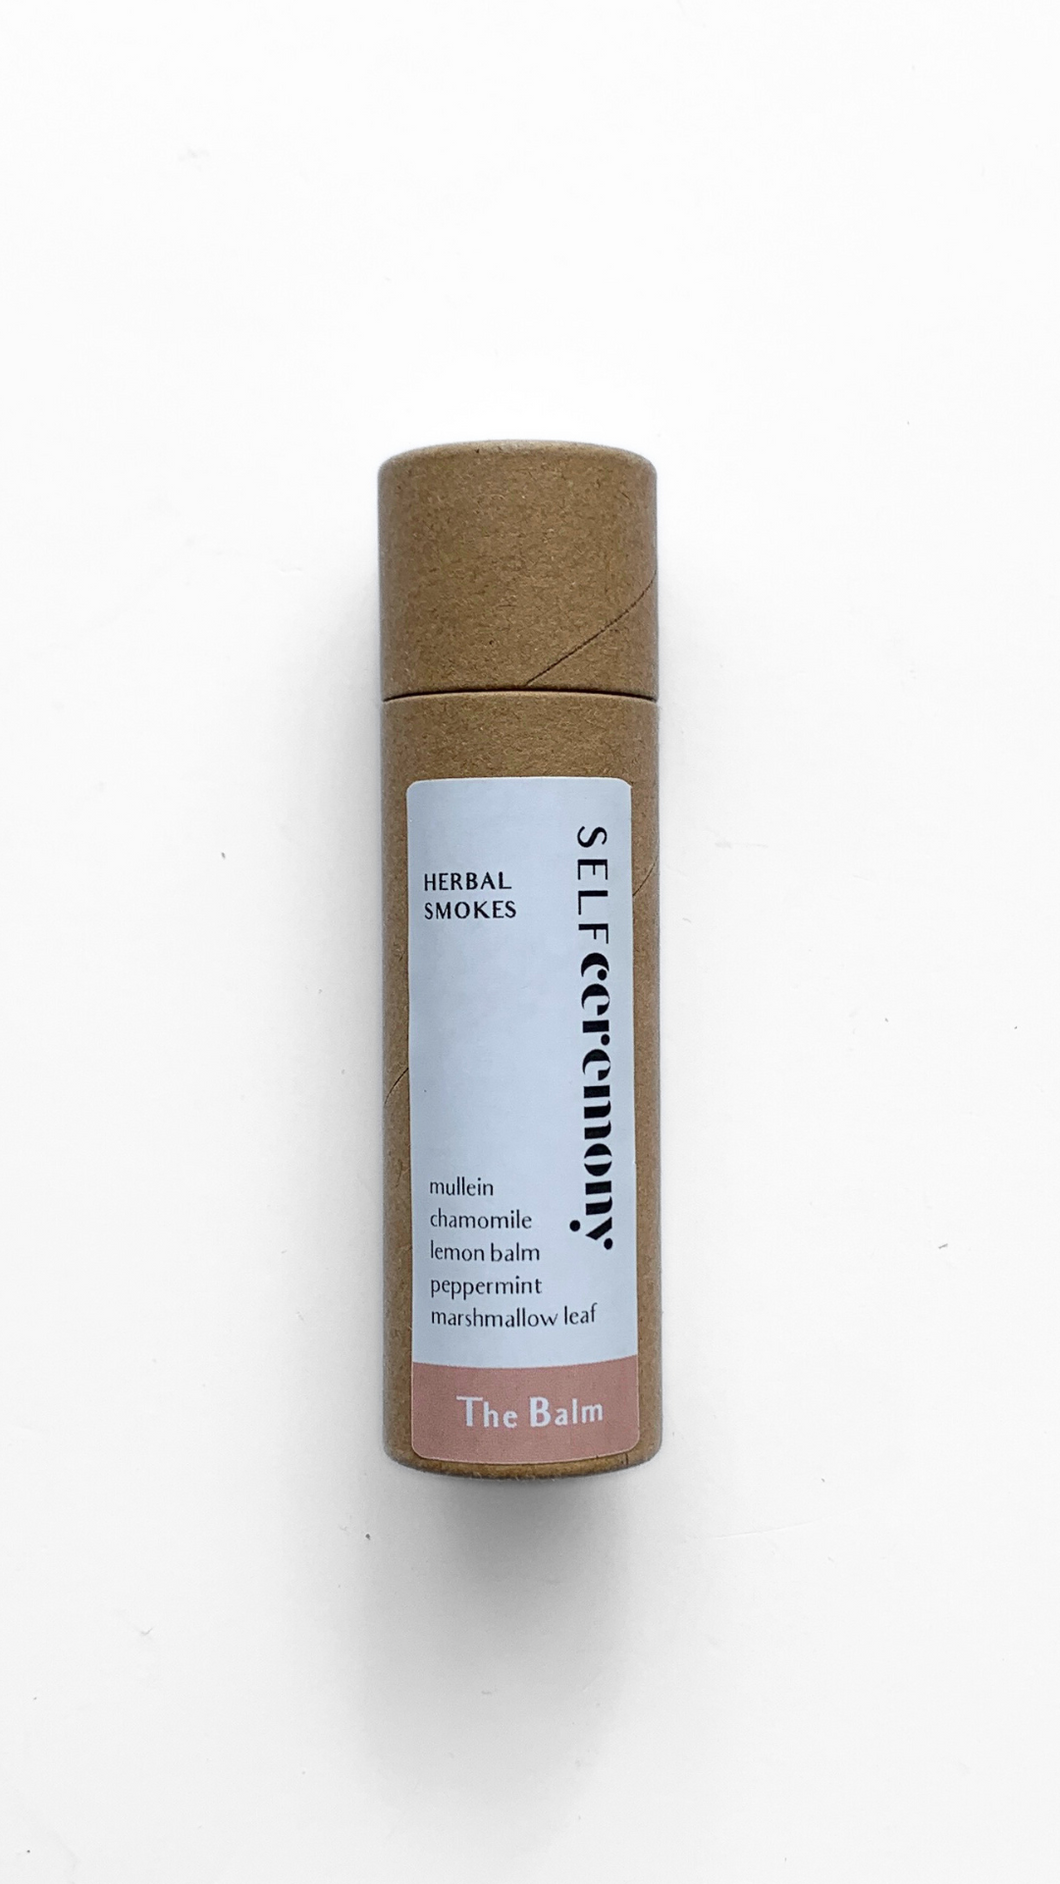 Herbal Pre-Rolled Smokes, The Balm